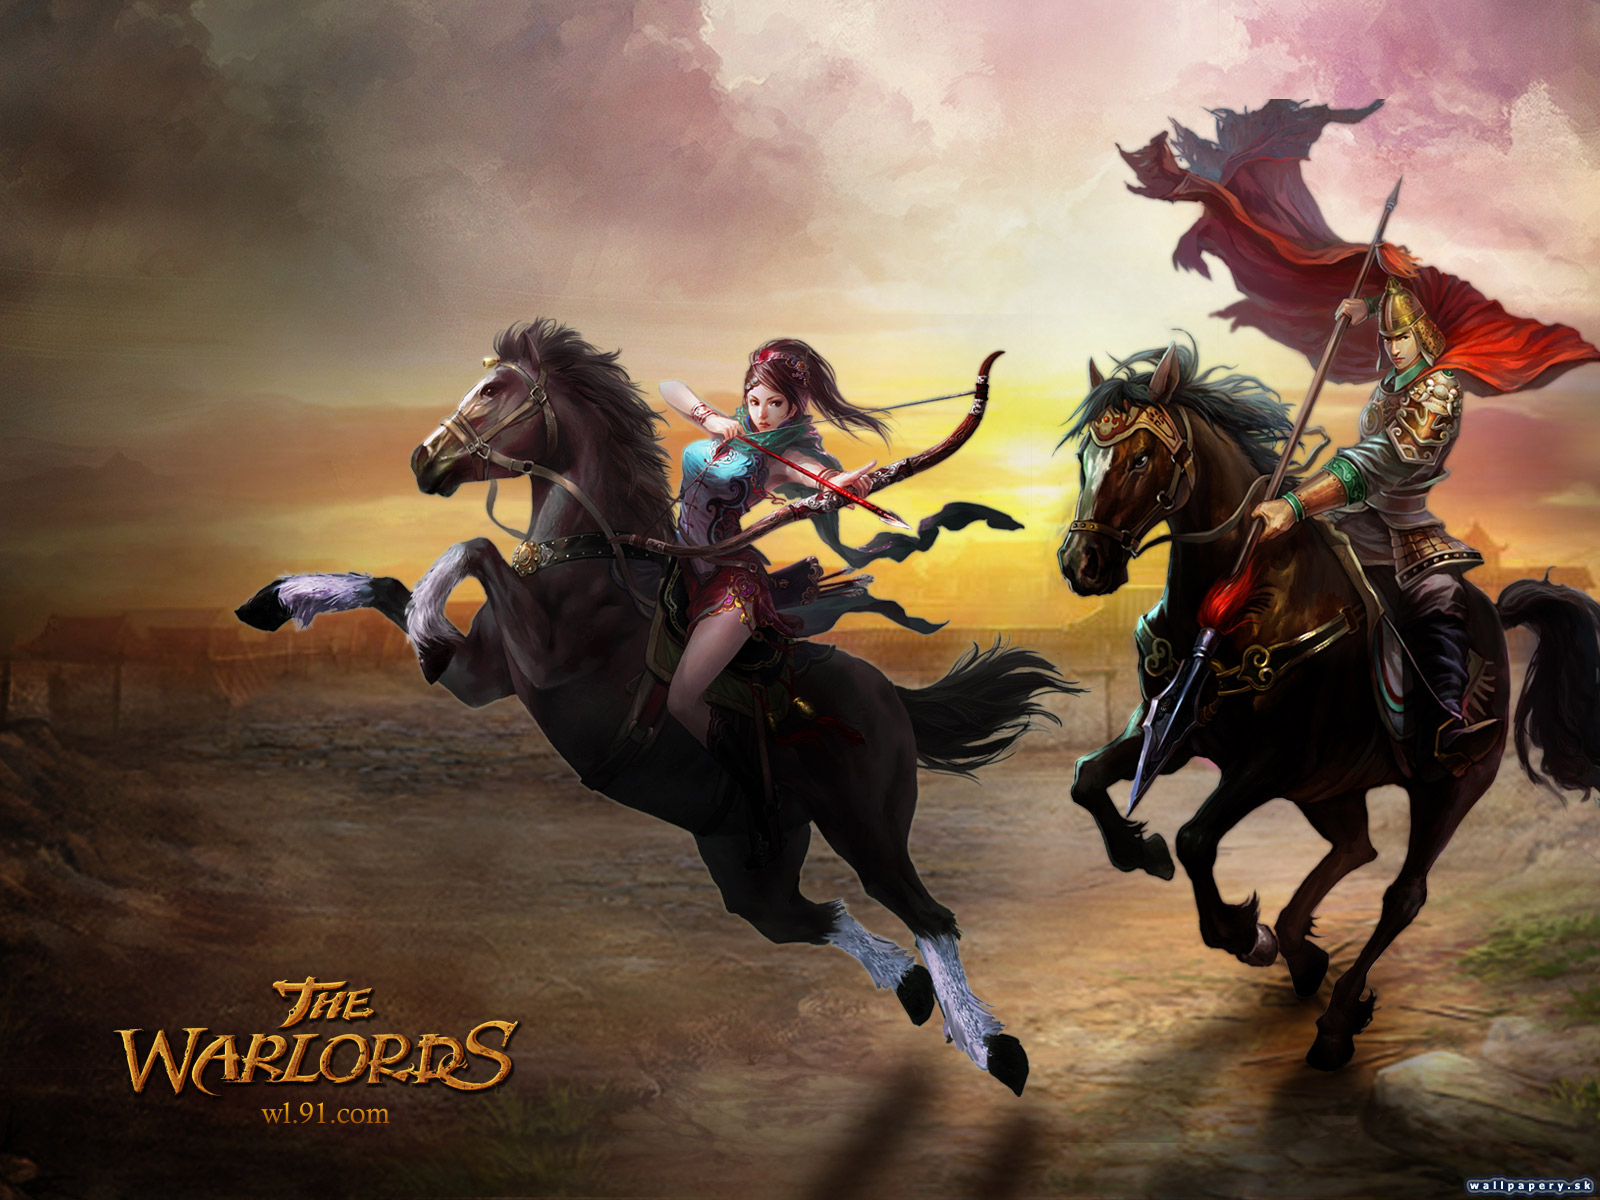 The Warlords - wallpaper 19